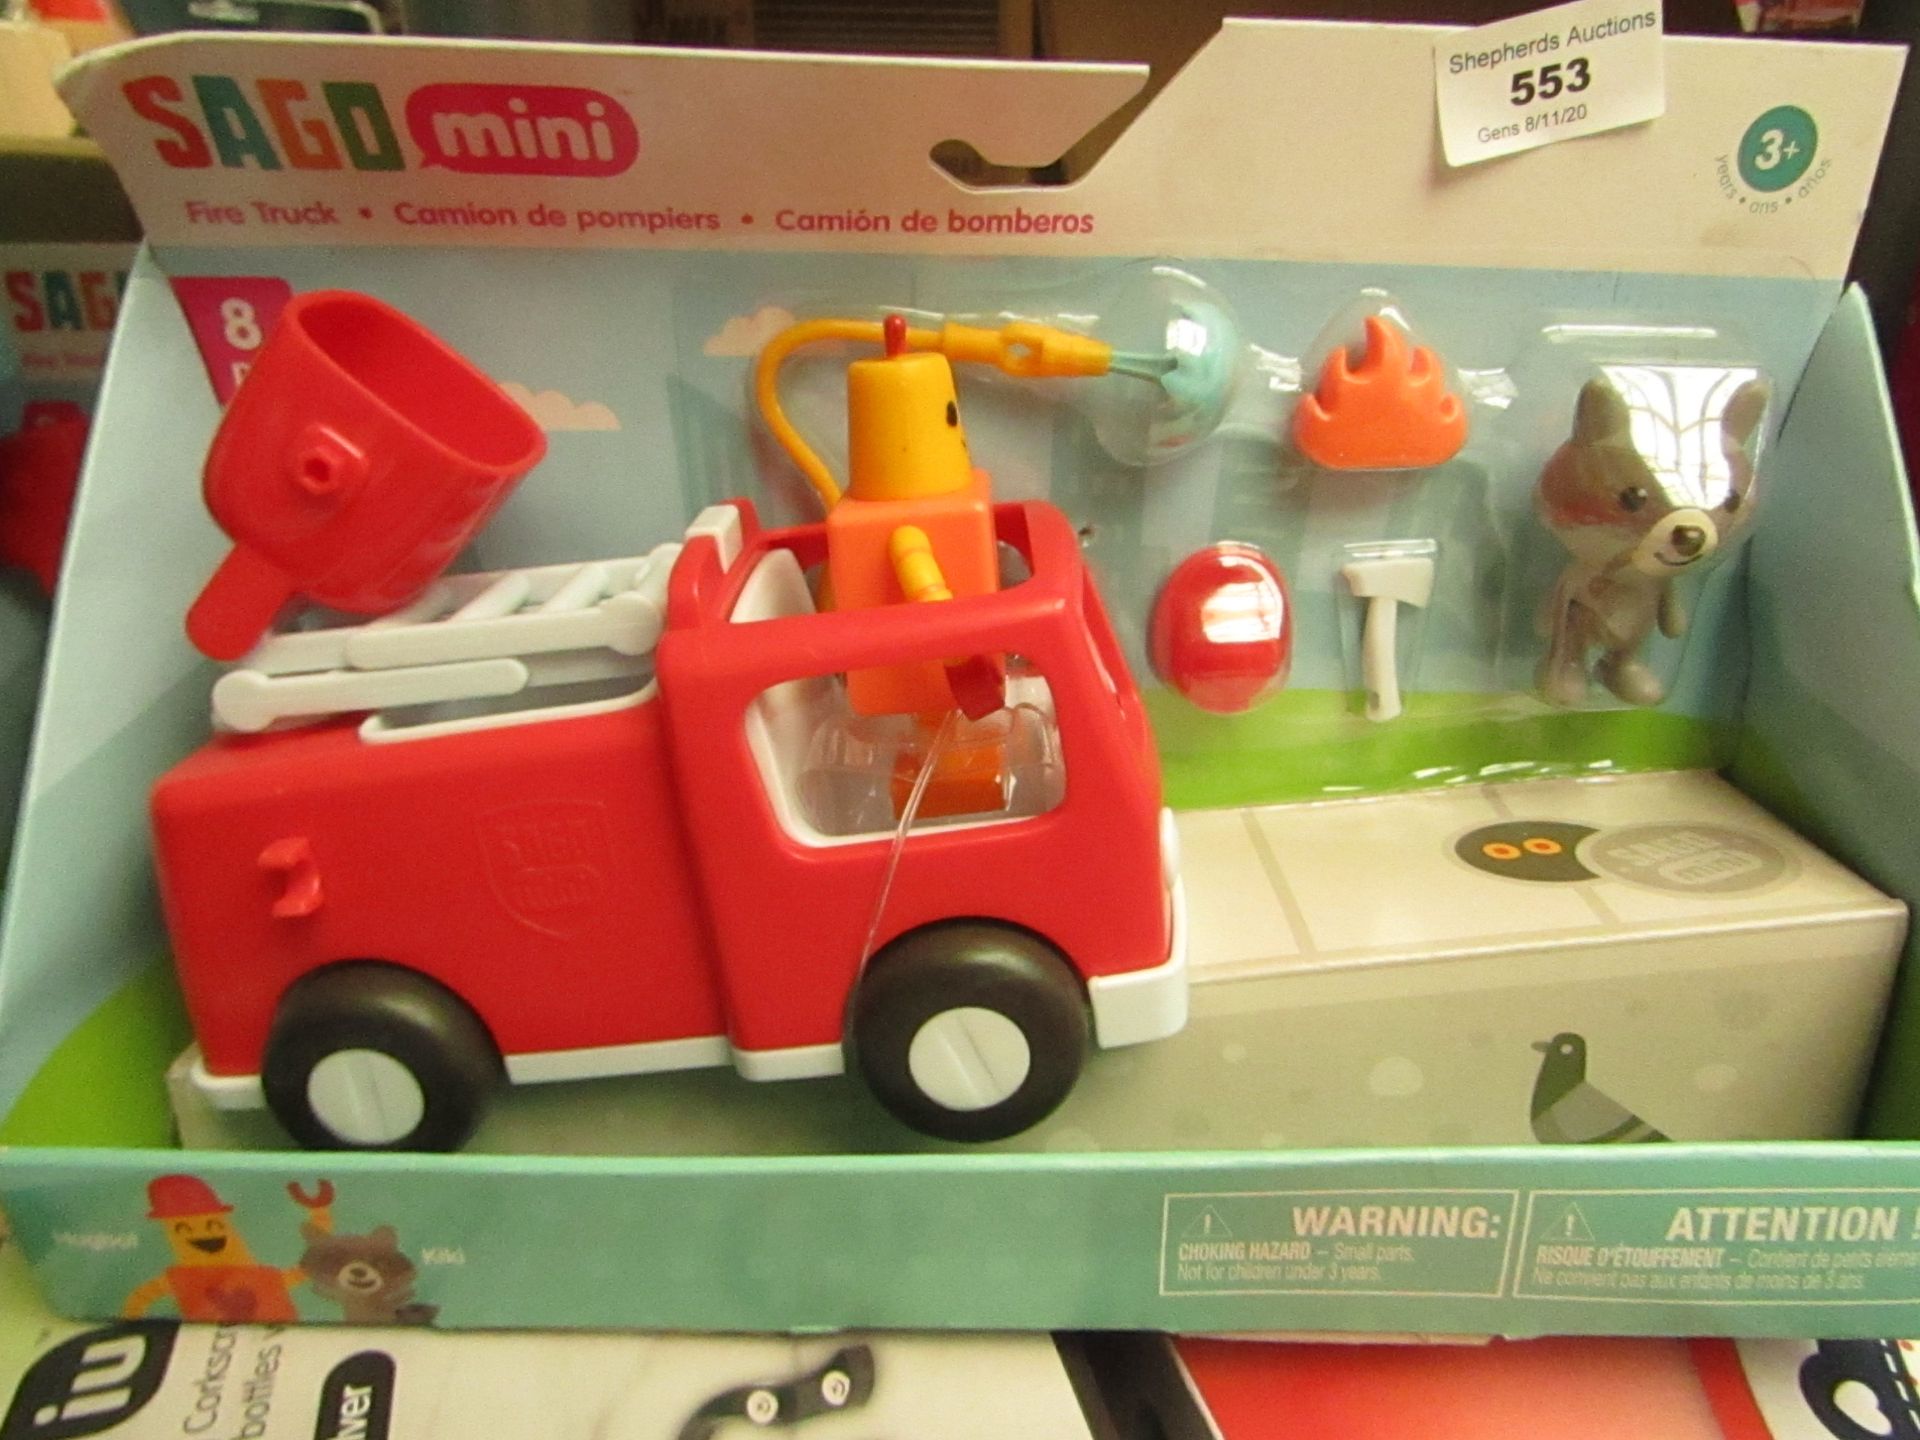 Sago mini Fir Truck with Accessories. New & Boxed